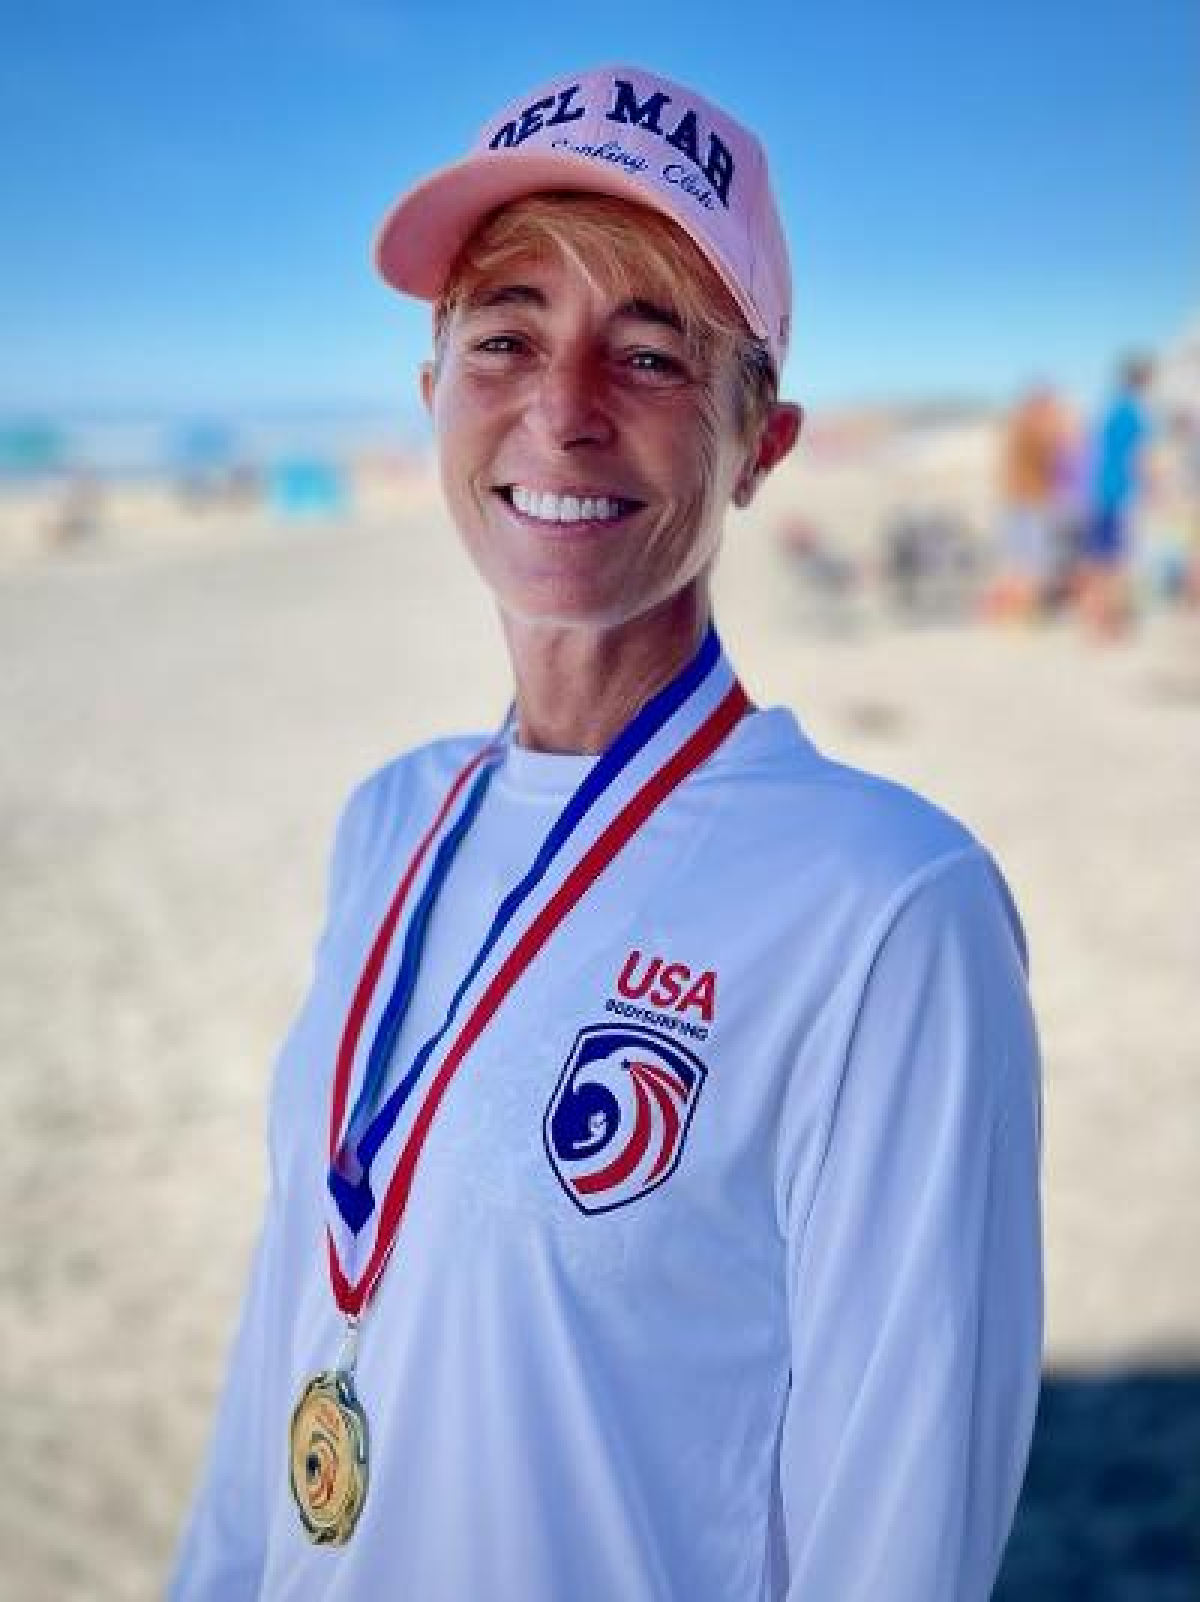 Meredith Rose, of the DMBC, won 1st place in the Women Over 17 division at the Huntington Beach USA BodySurfing contest.